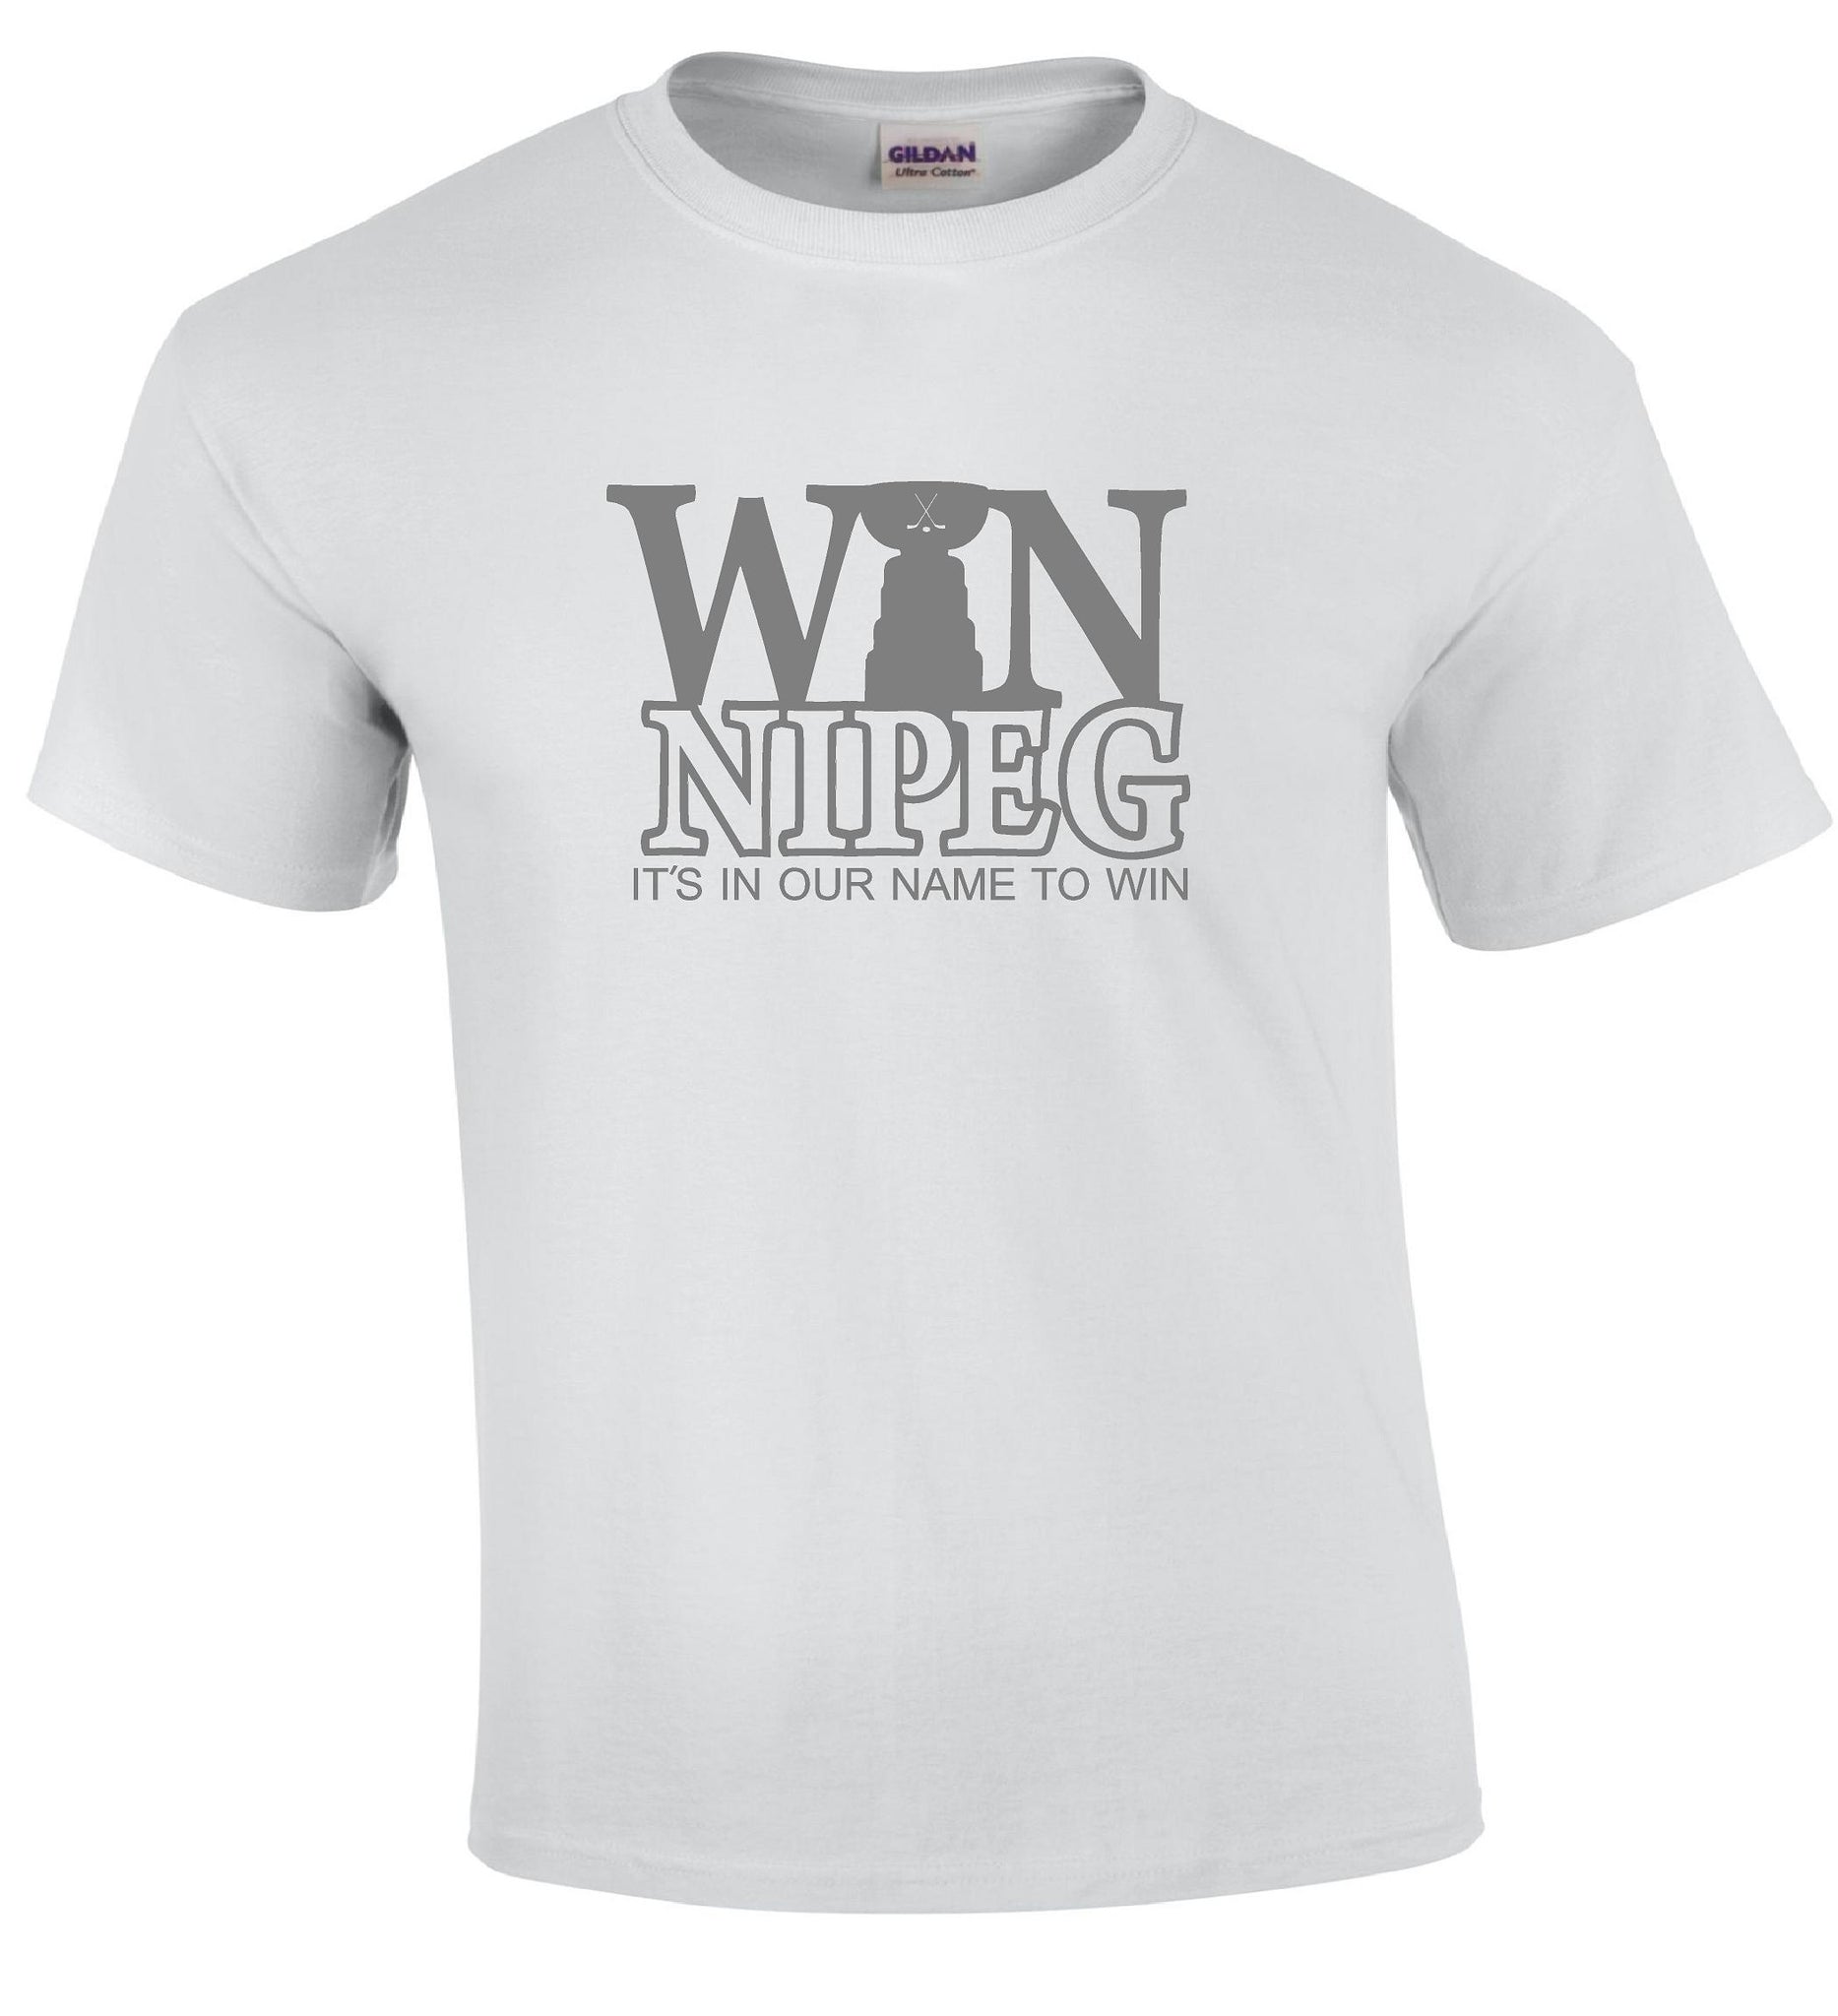 WINnipeg It's in our name to win T-shirts